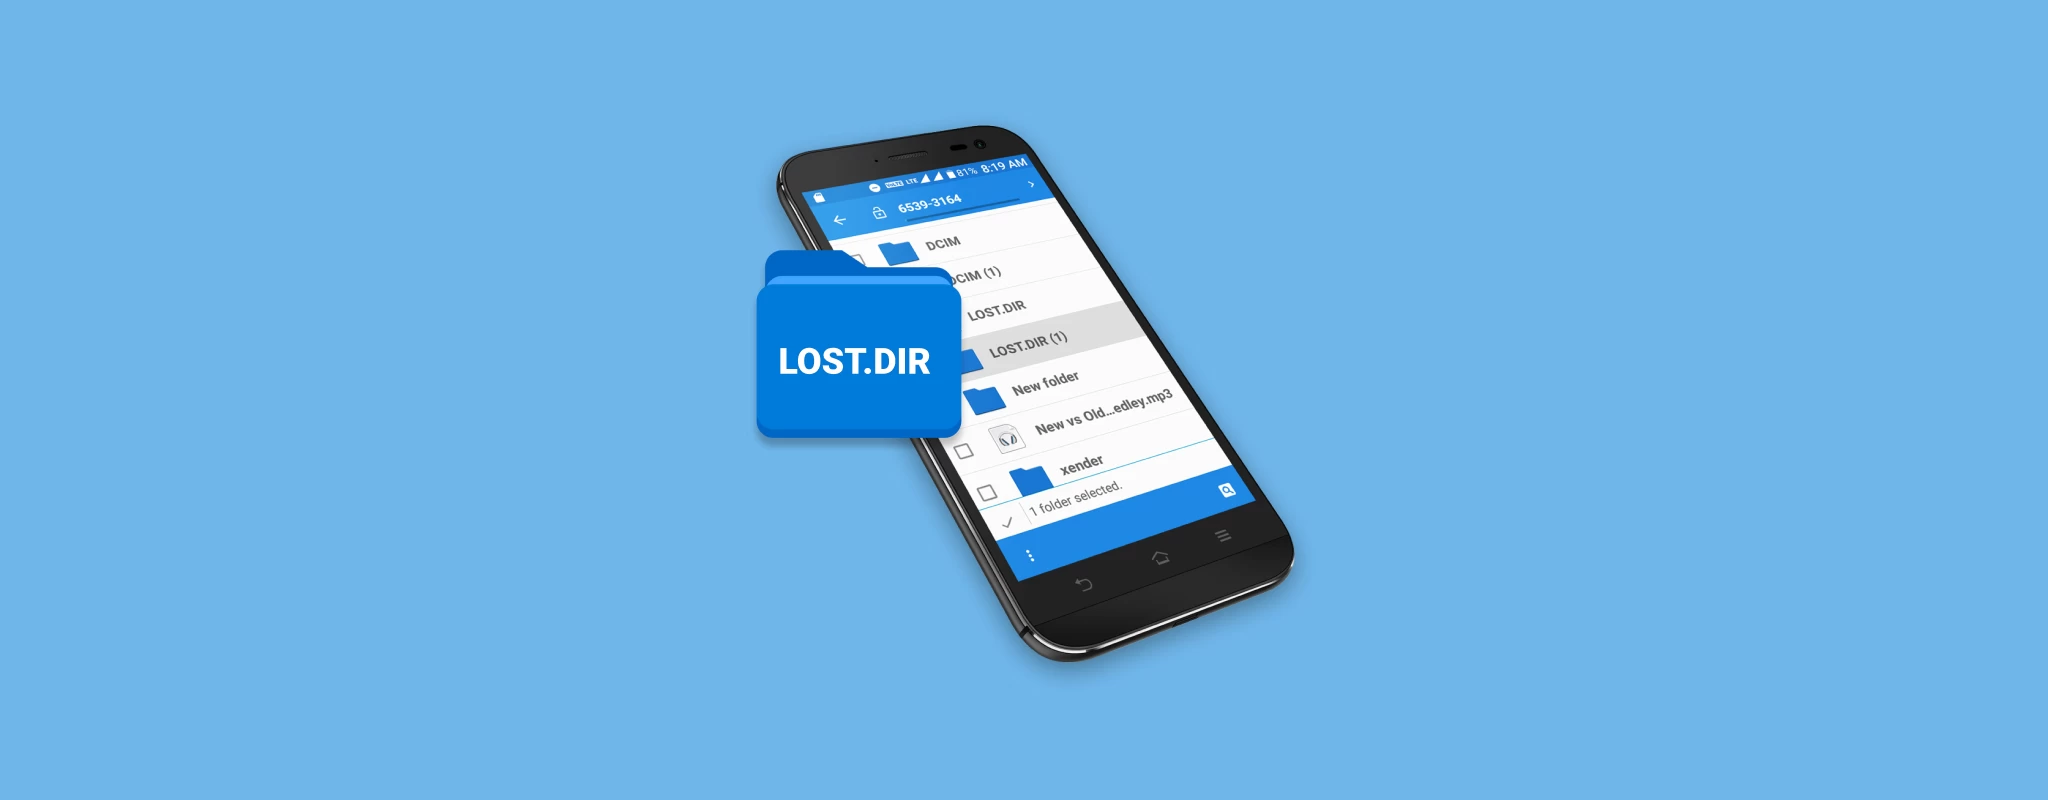 How To Find lost files on Android devices